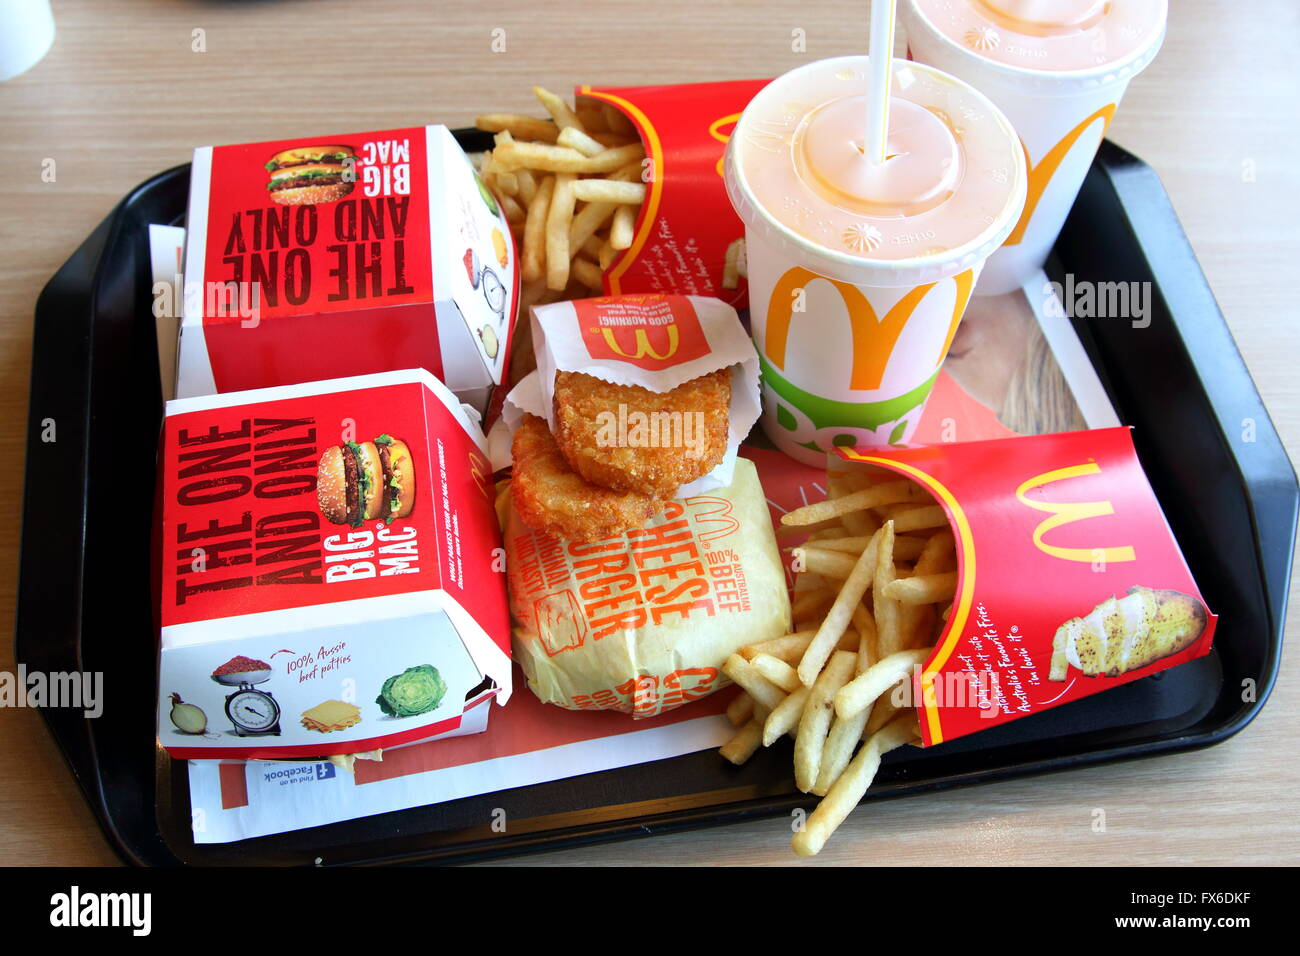 McDonald's meal - Big Mac and cheese burgers, fries and drink on plastic tray Stock Photo